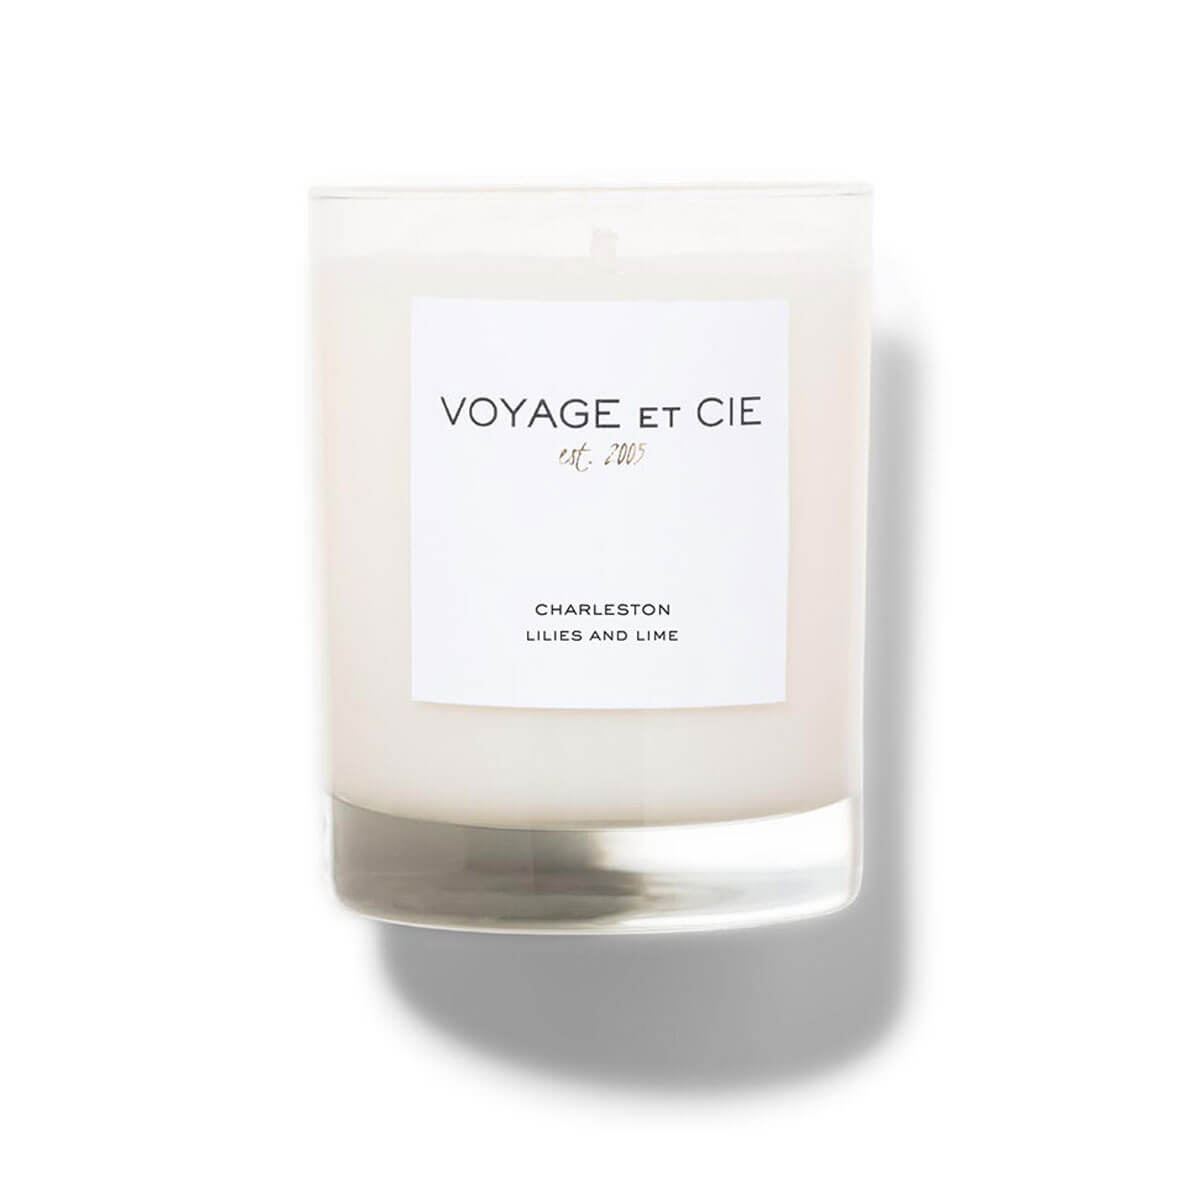 Voyage et Cie Charleston Lillies and Lime Candle front | MILK MONEY milkmoney.co | soy wax candles, small candles. natural candles, organic candles, scented soy candles, concrete candle, hand poured candles, hand poured soy candles, cement candle, hand poured soy wax candles, scented hand poured candles, hand poured scented candles